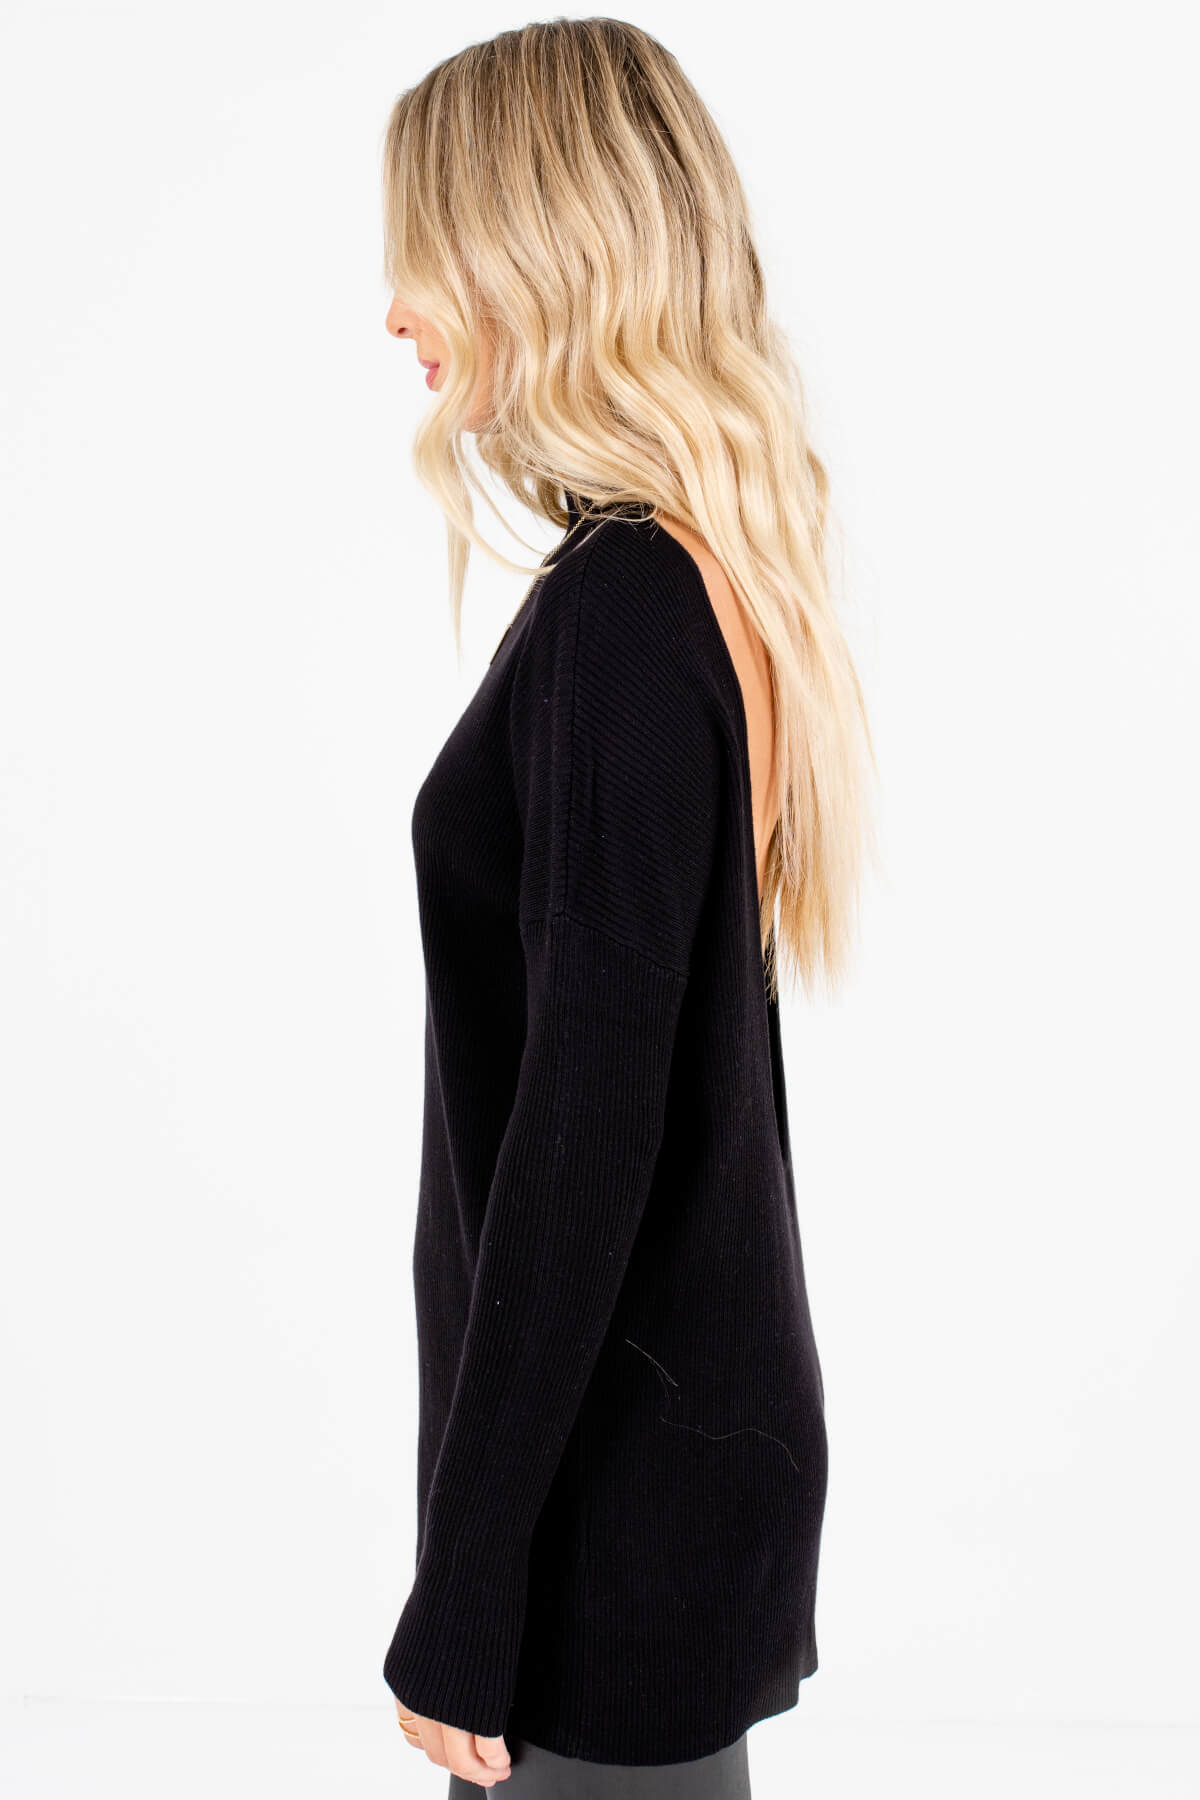 Black Turtleneck Style Boutique Sweaters for Women